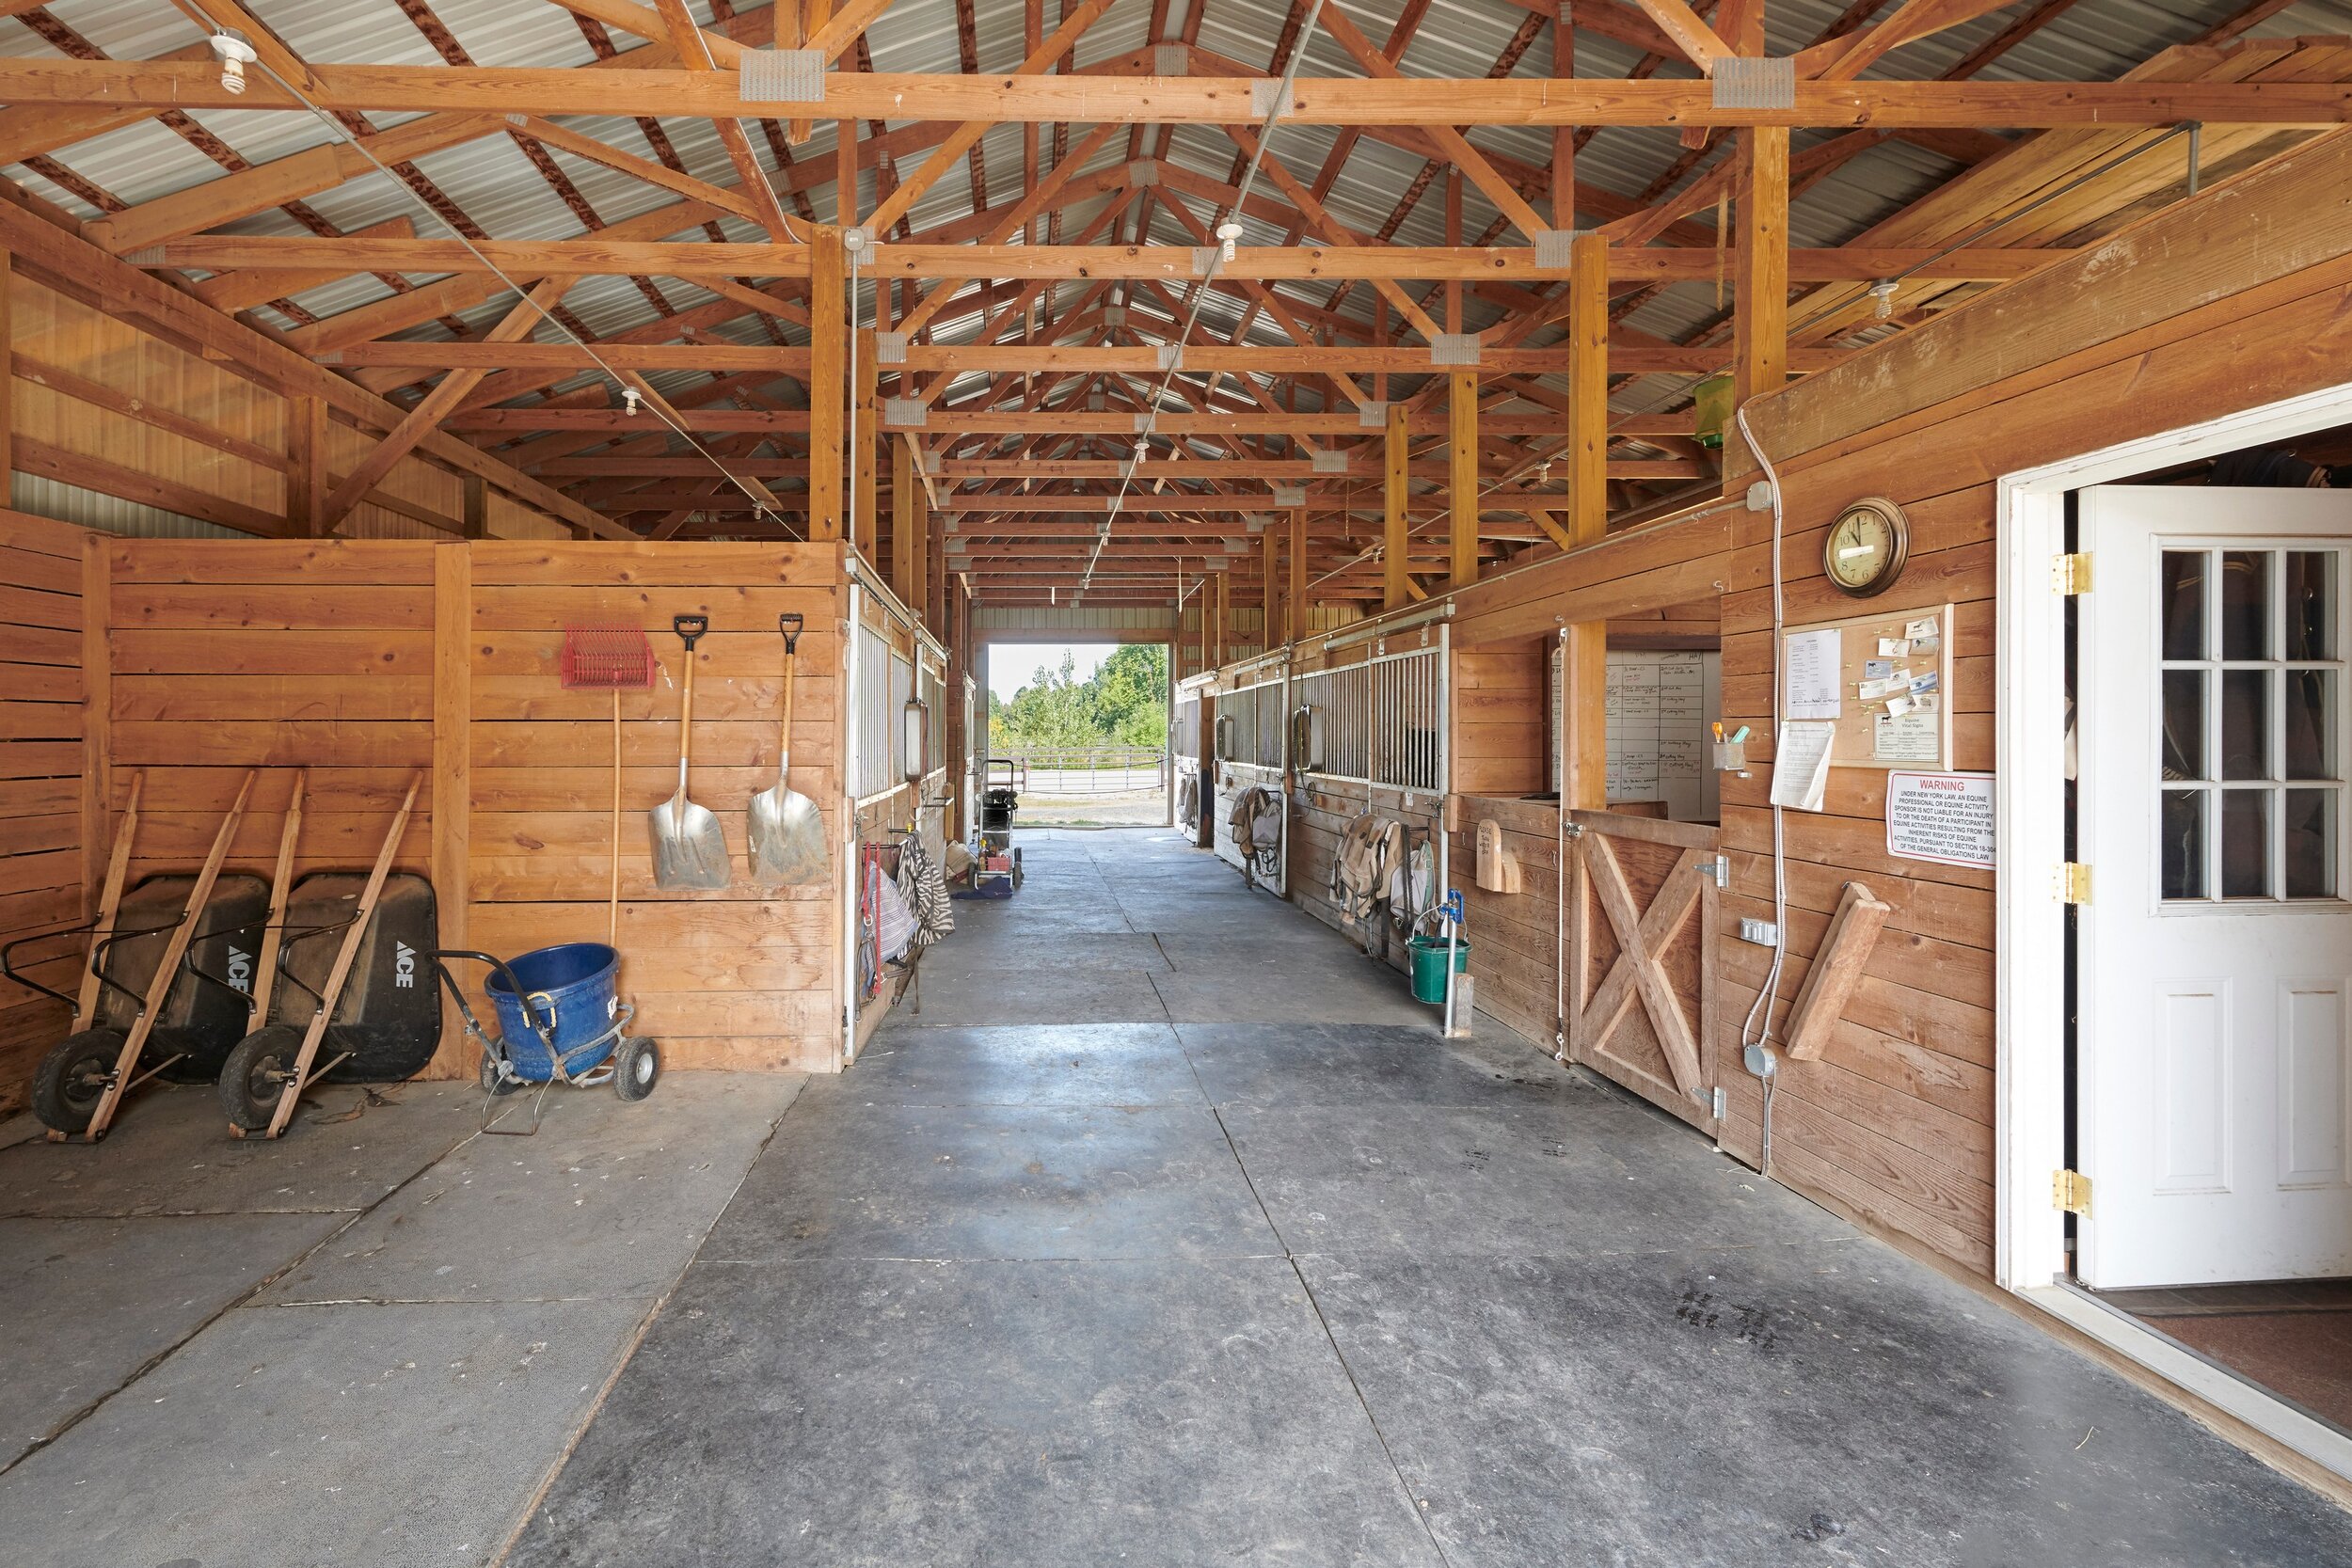 38 for sale 10050 Short Cut Rd, Weedsport, NY horse riding stables farm ranch equestrian property for .JPG